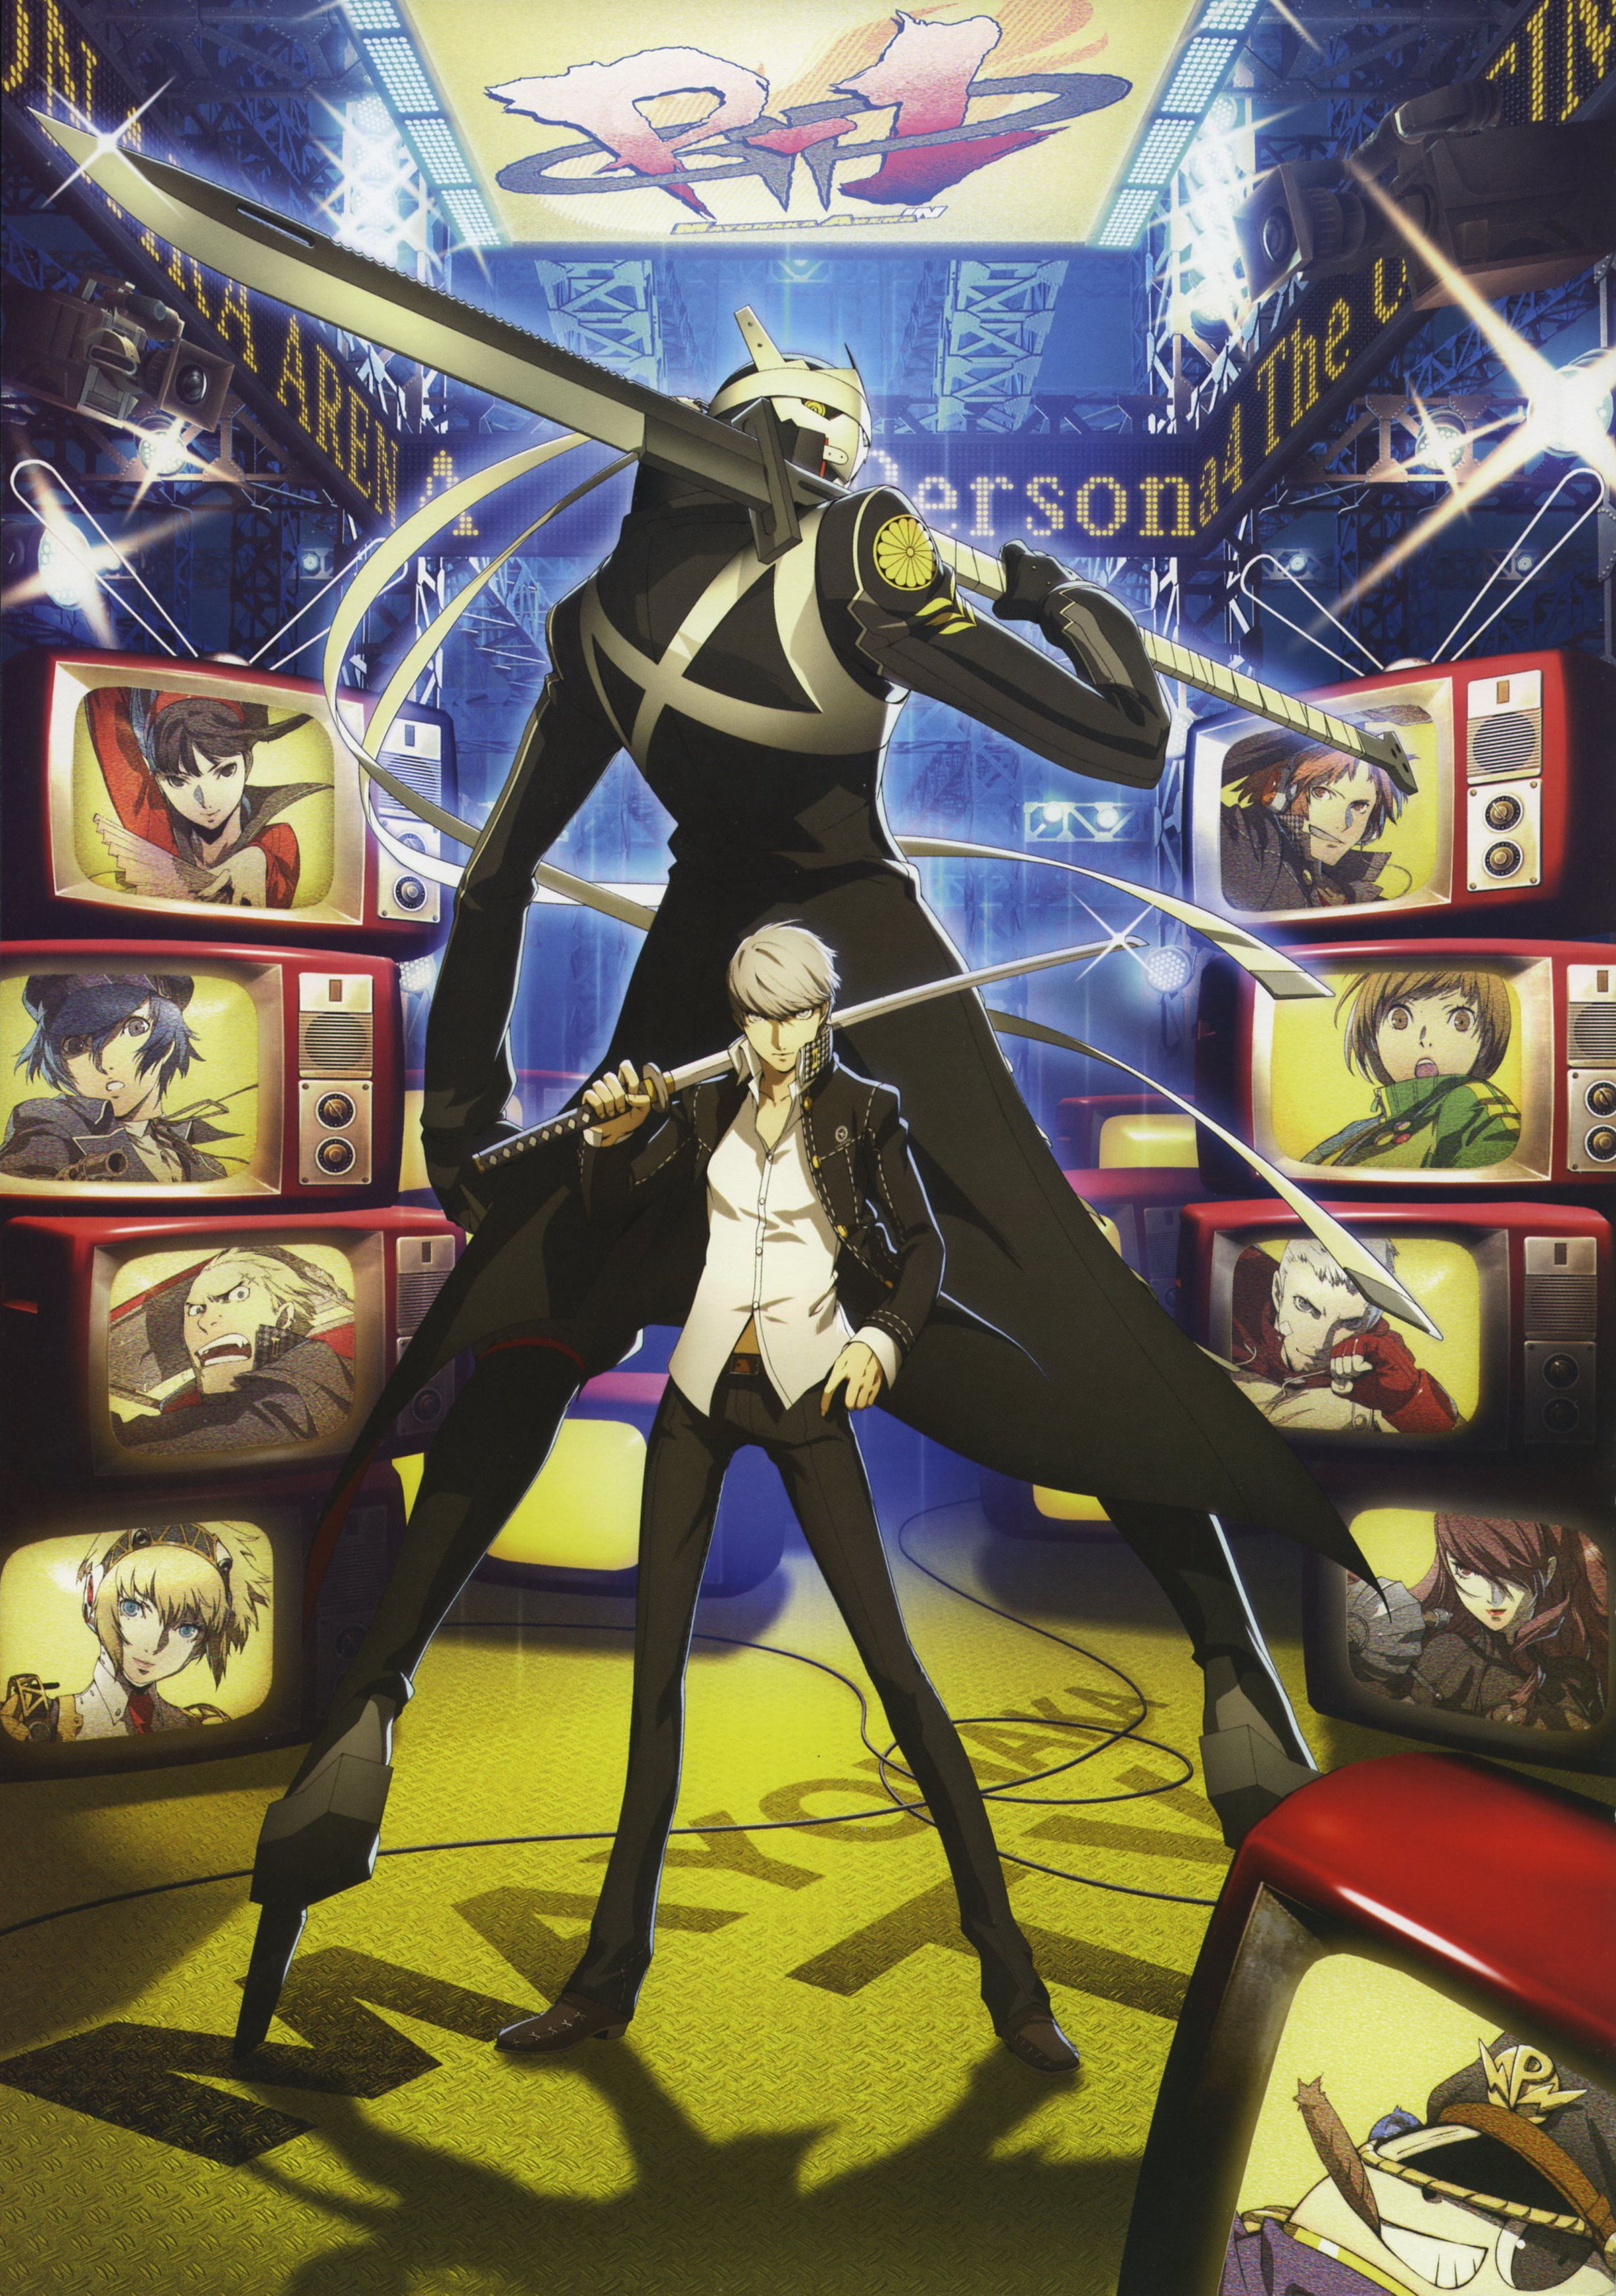 persona 4 phone wallpapers Wallpapers